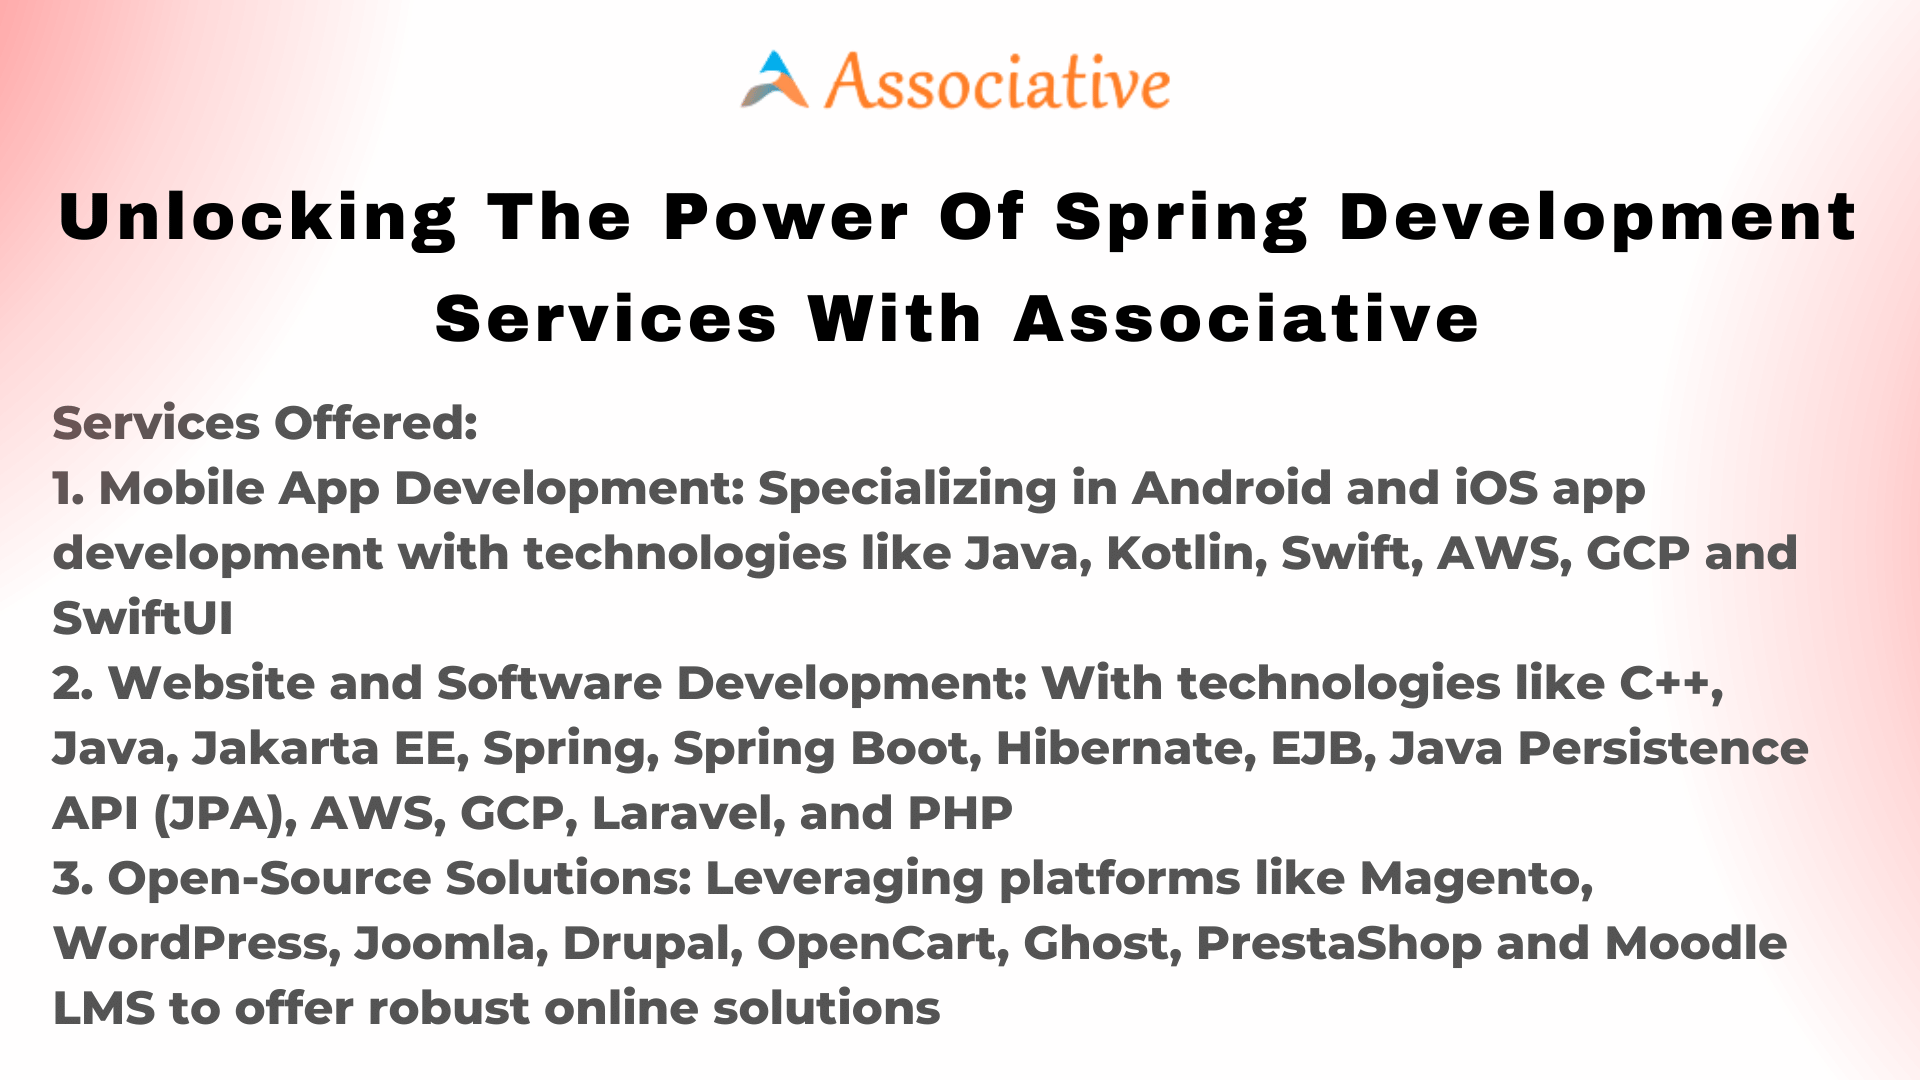 Unlocking the Power of Spring Development Services with Associative